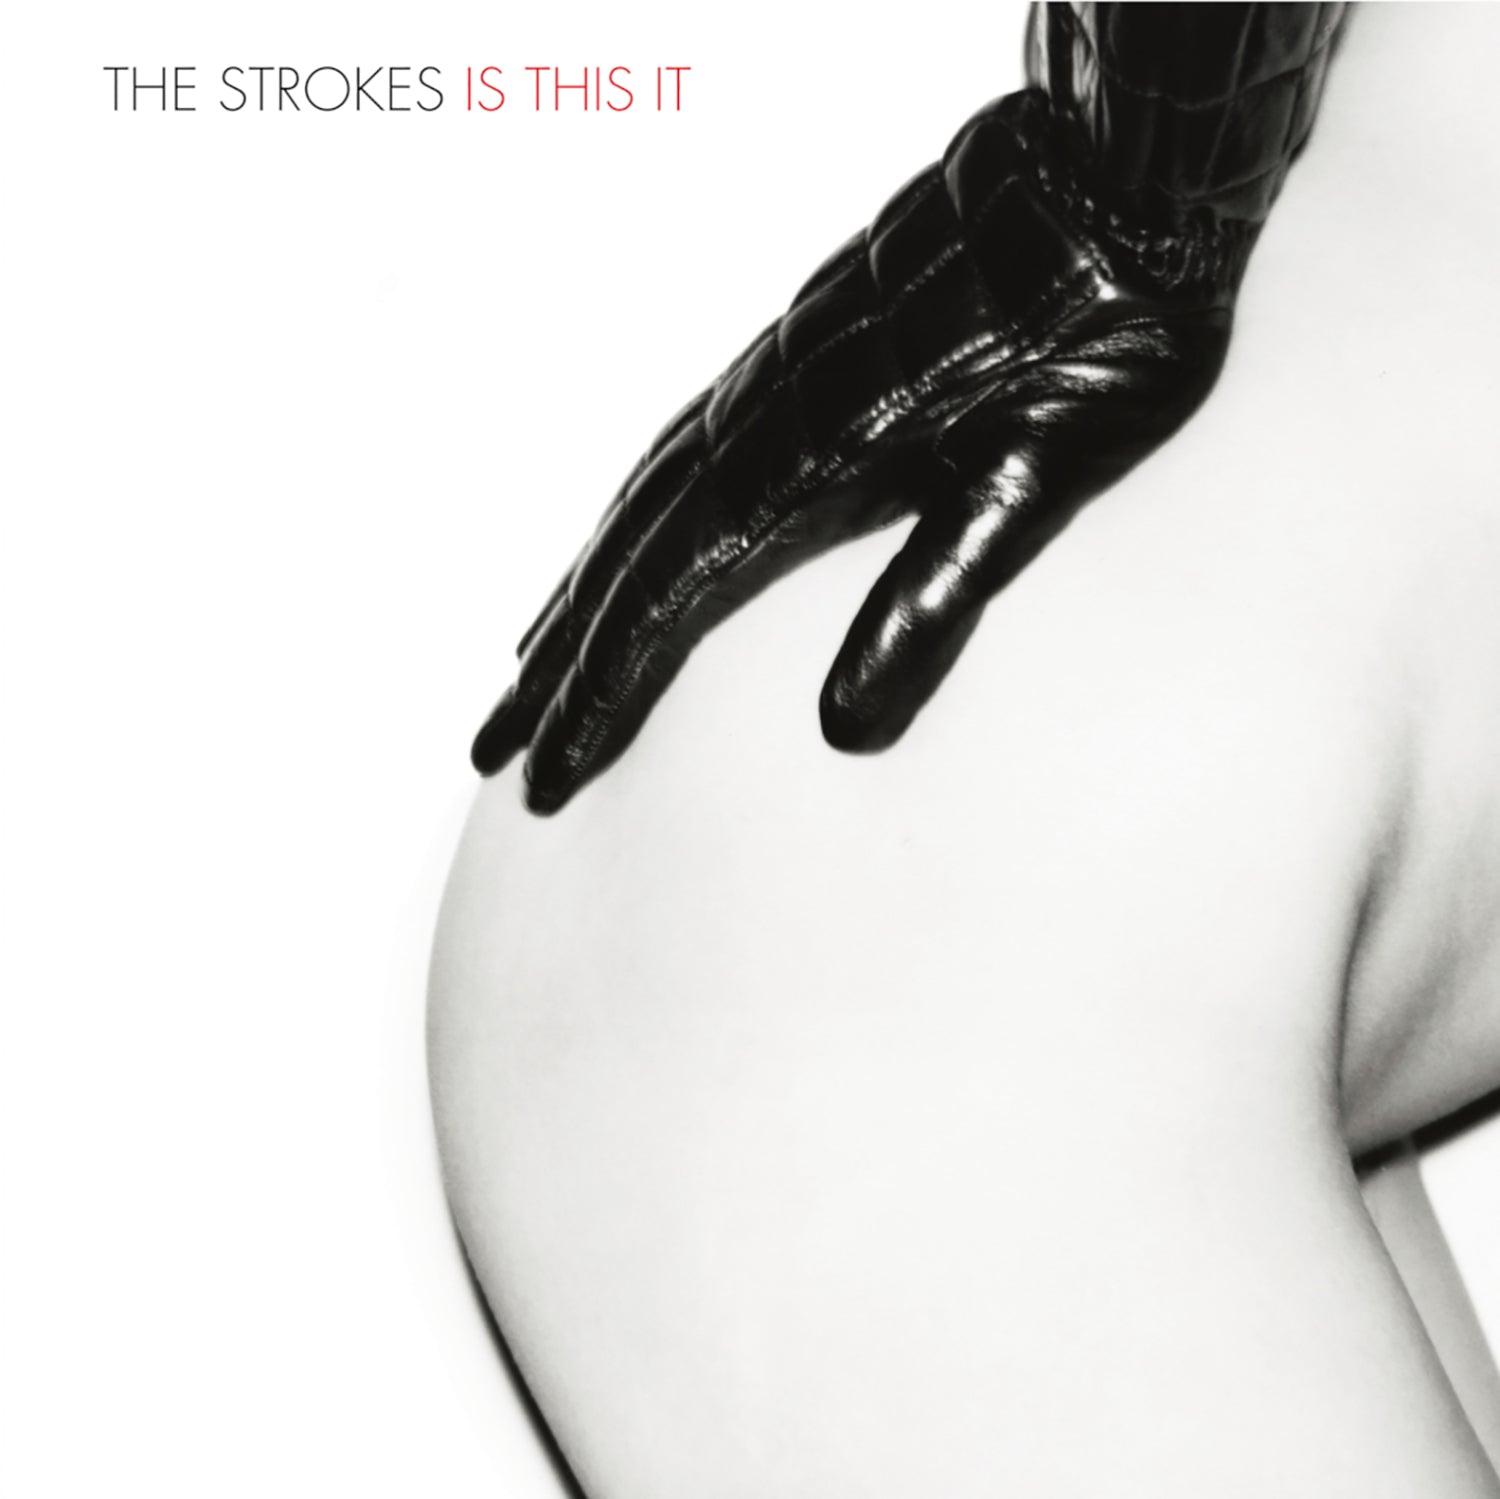 The STROKES 'IS THIS IT'